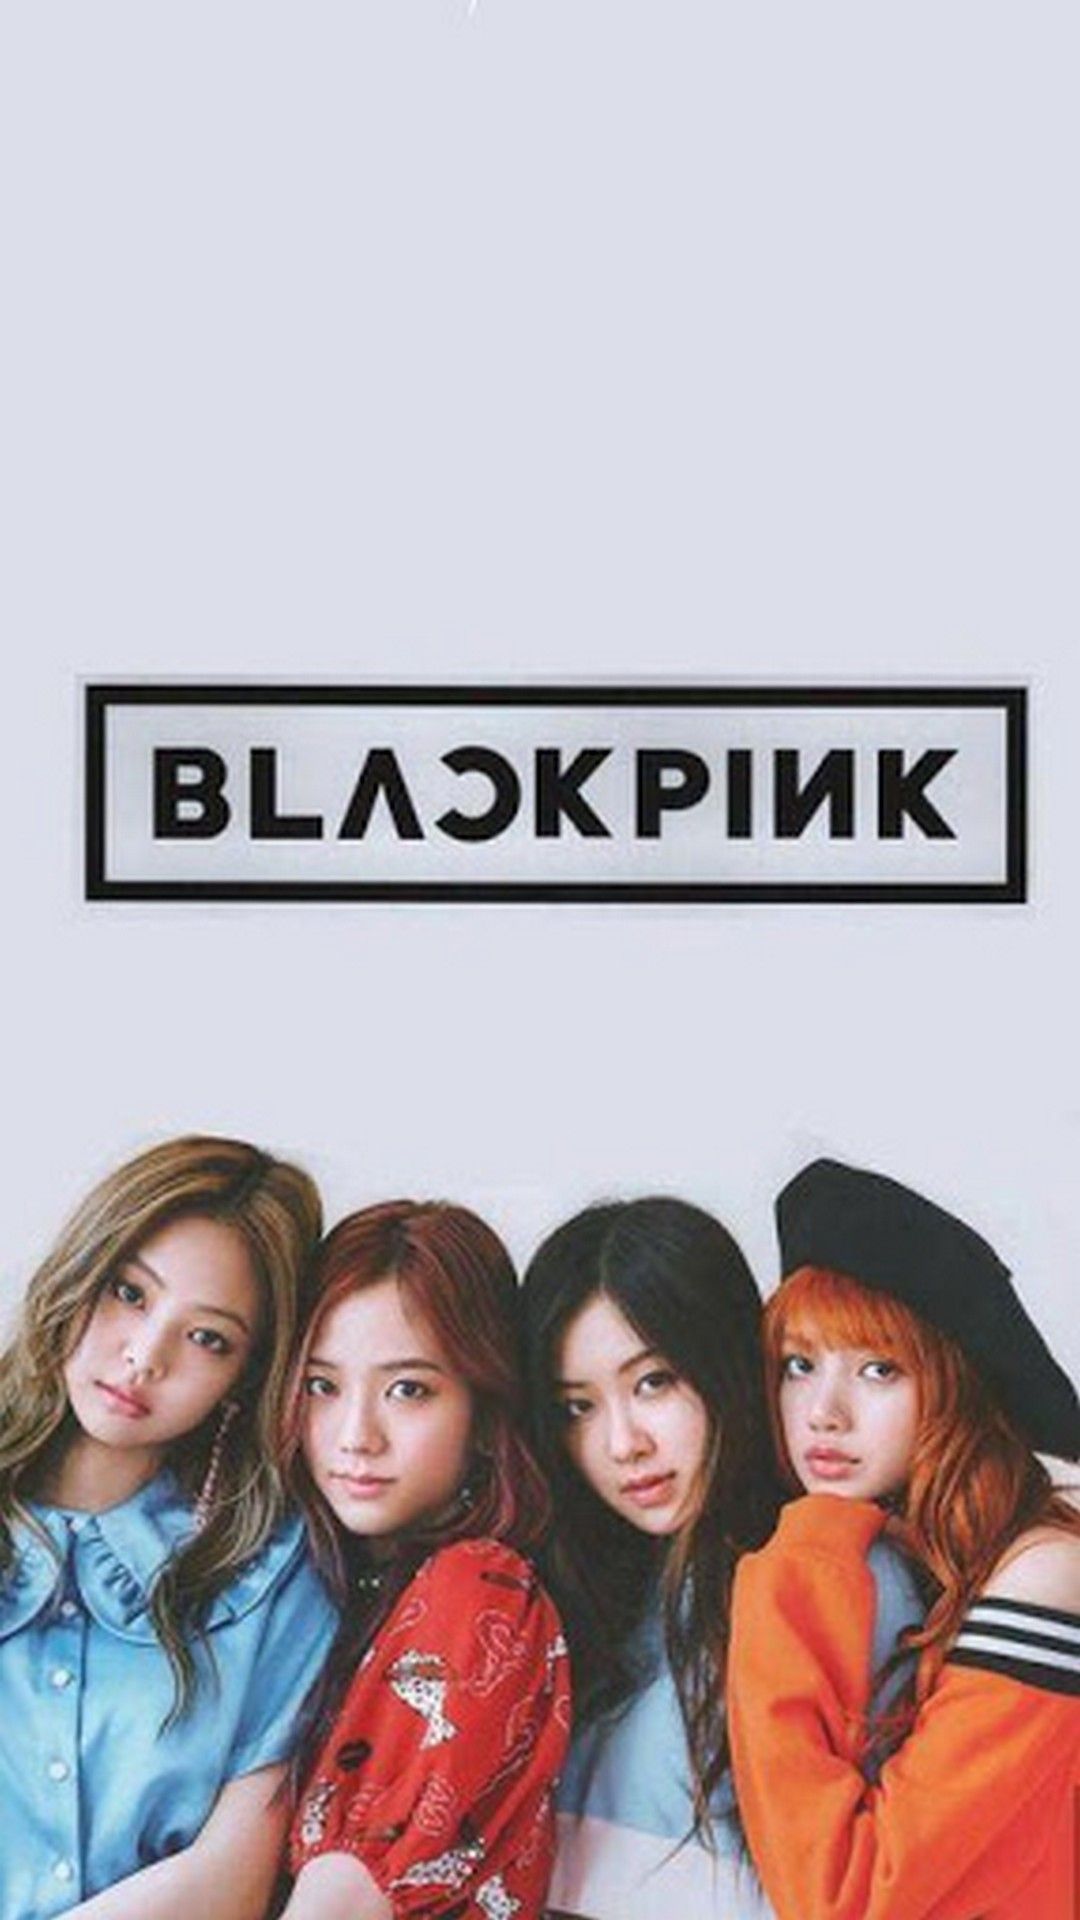 Wallpaper Android Blackpink Android Wallpaper